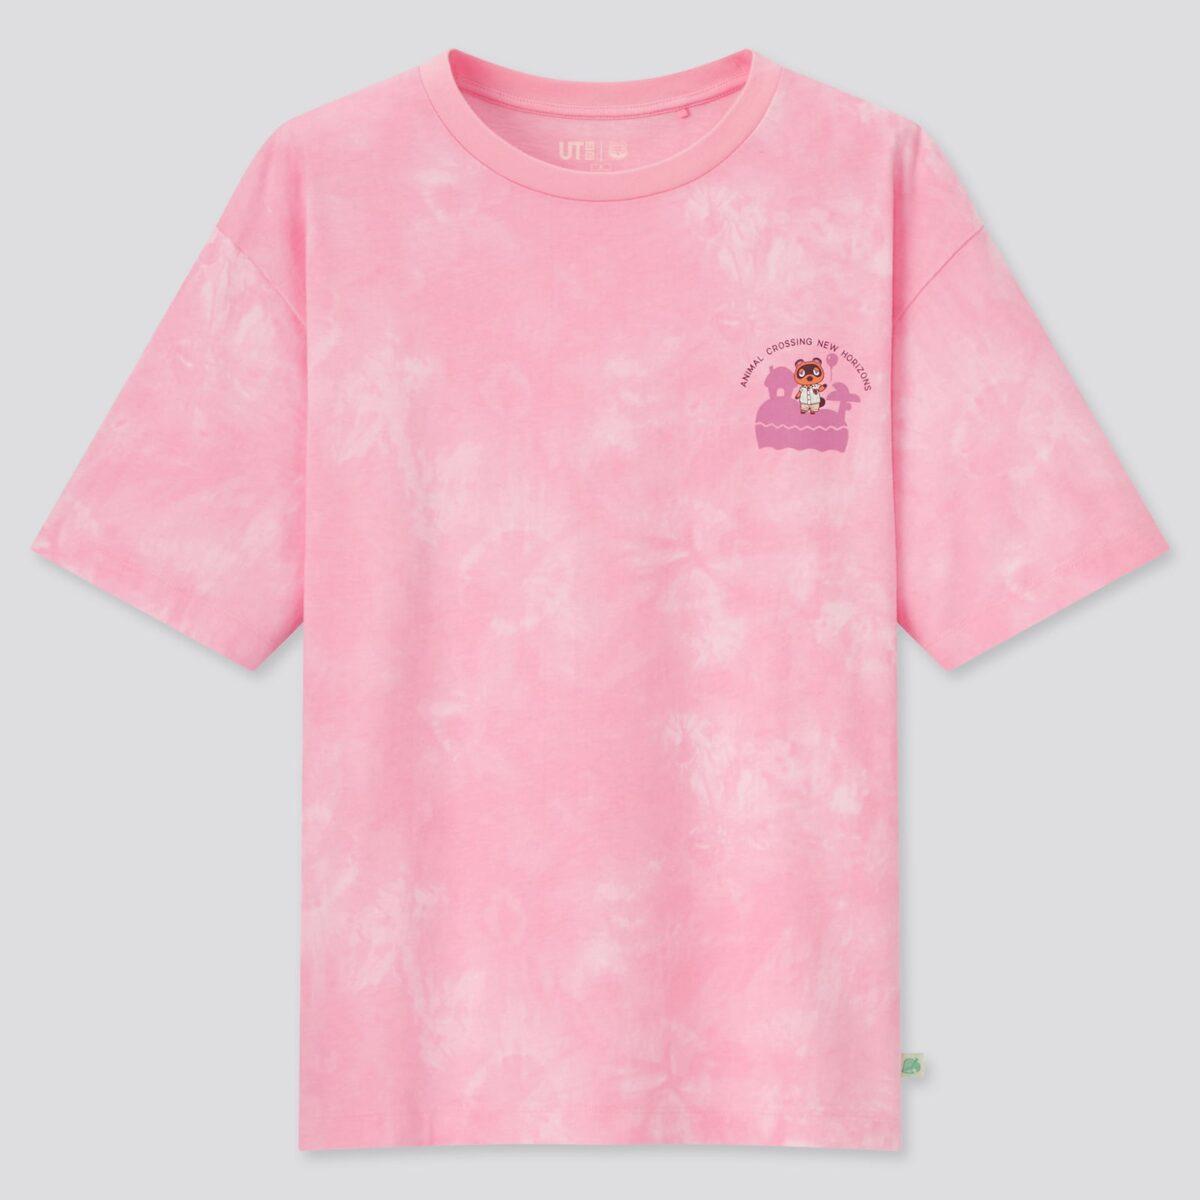 Pink shirt from Uniqlo Animal Crossing Collection